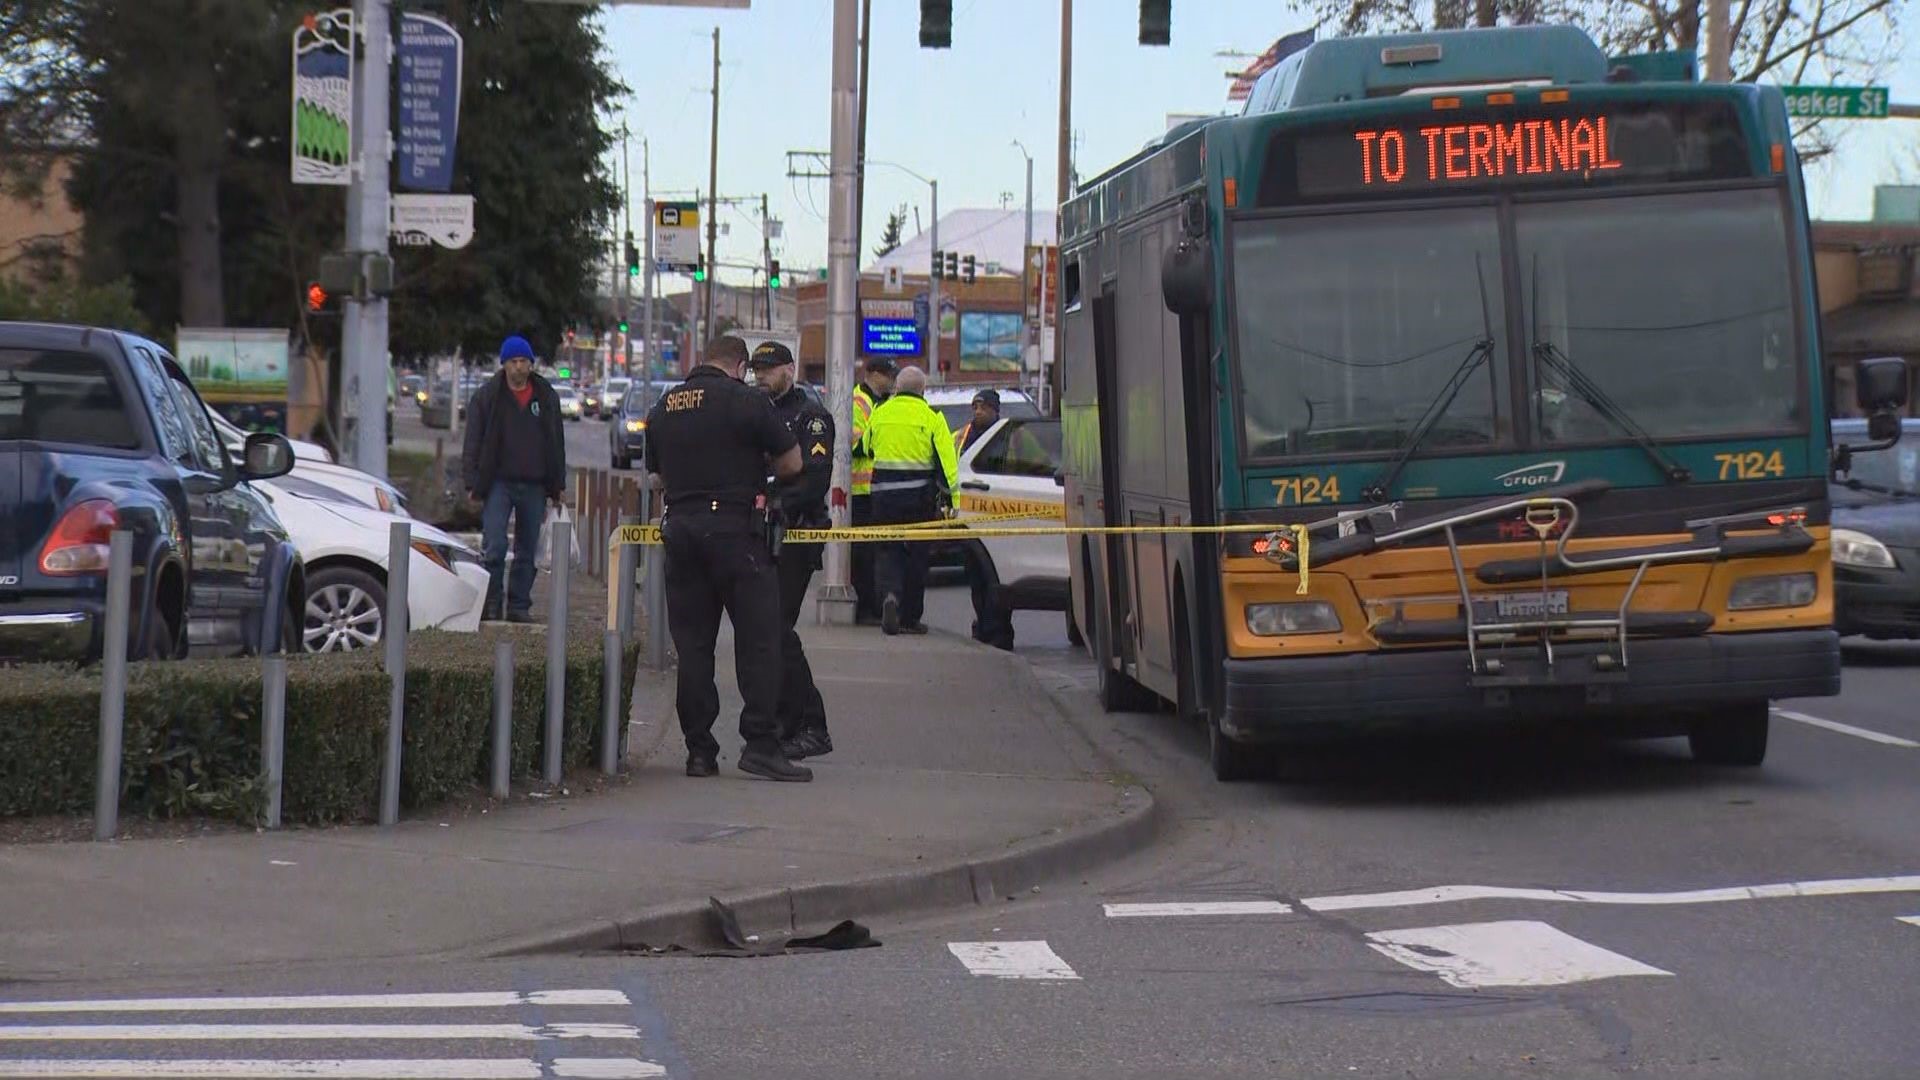 One person was shot on a King County Metro bus on Feb. 16 after an altercation.